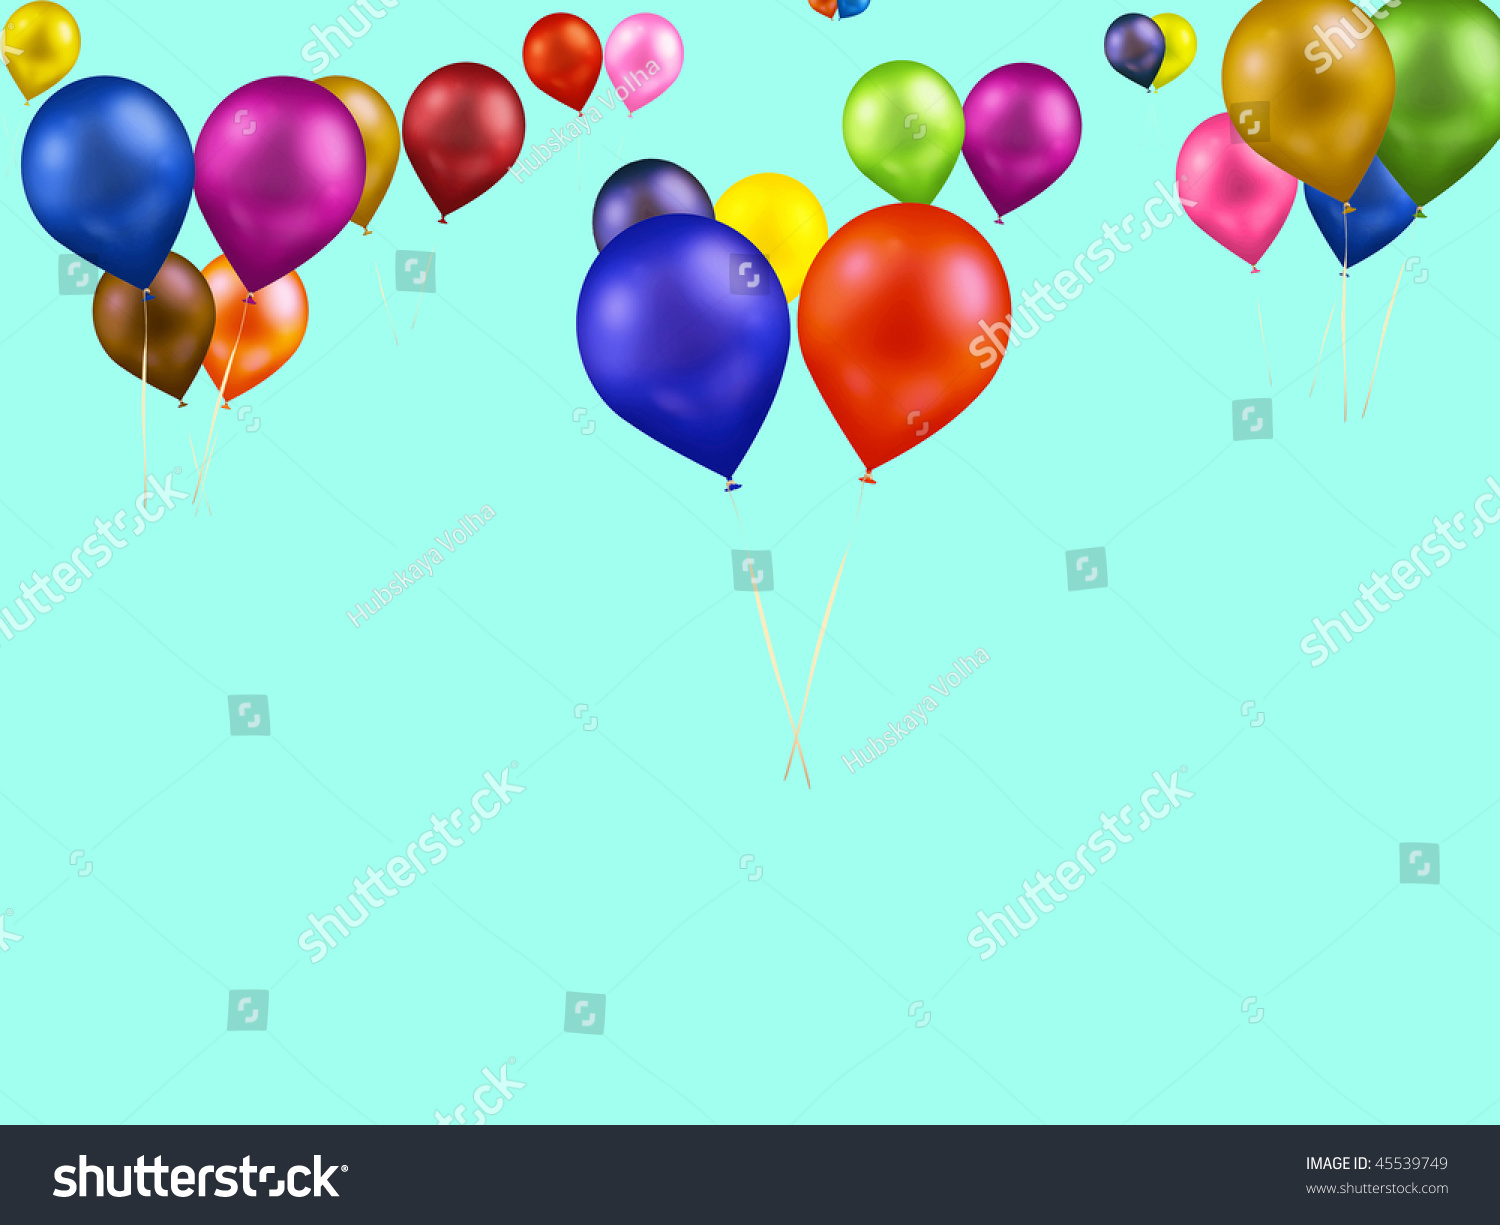 Turquoise Background Balloons Two Stock Photo 45539749 : Shutterstock